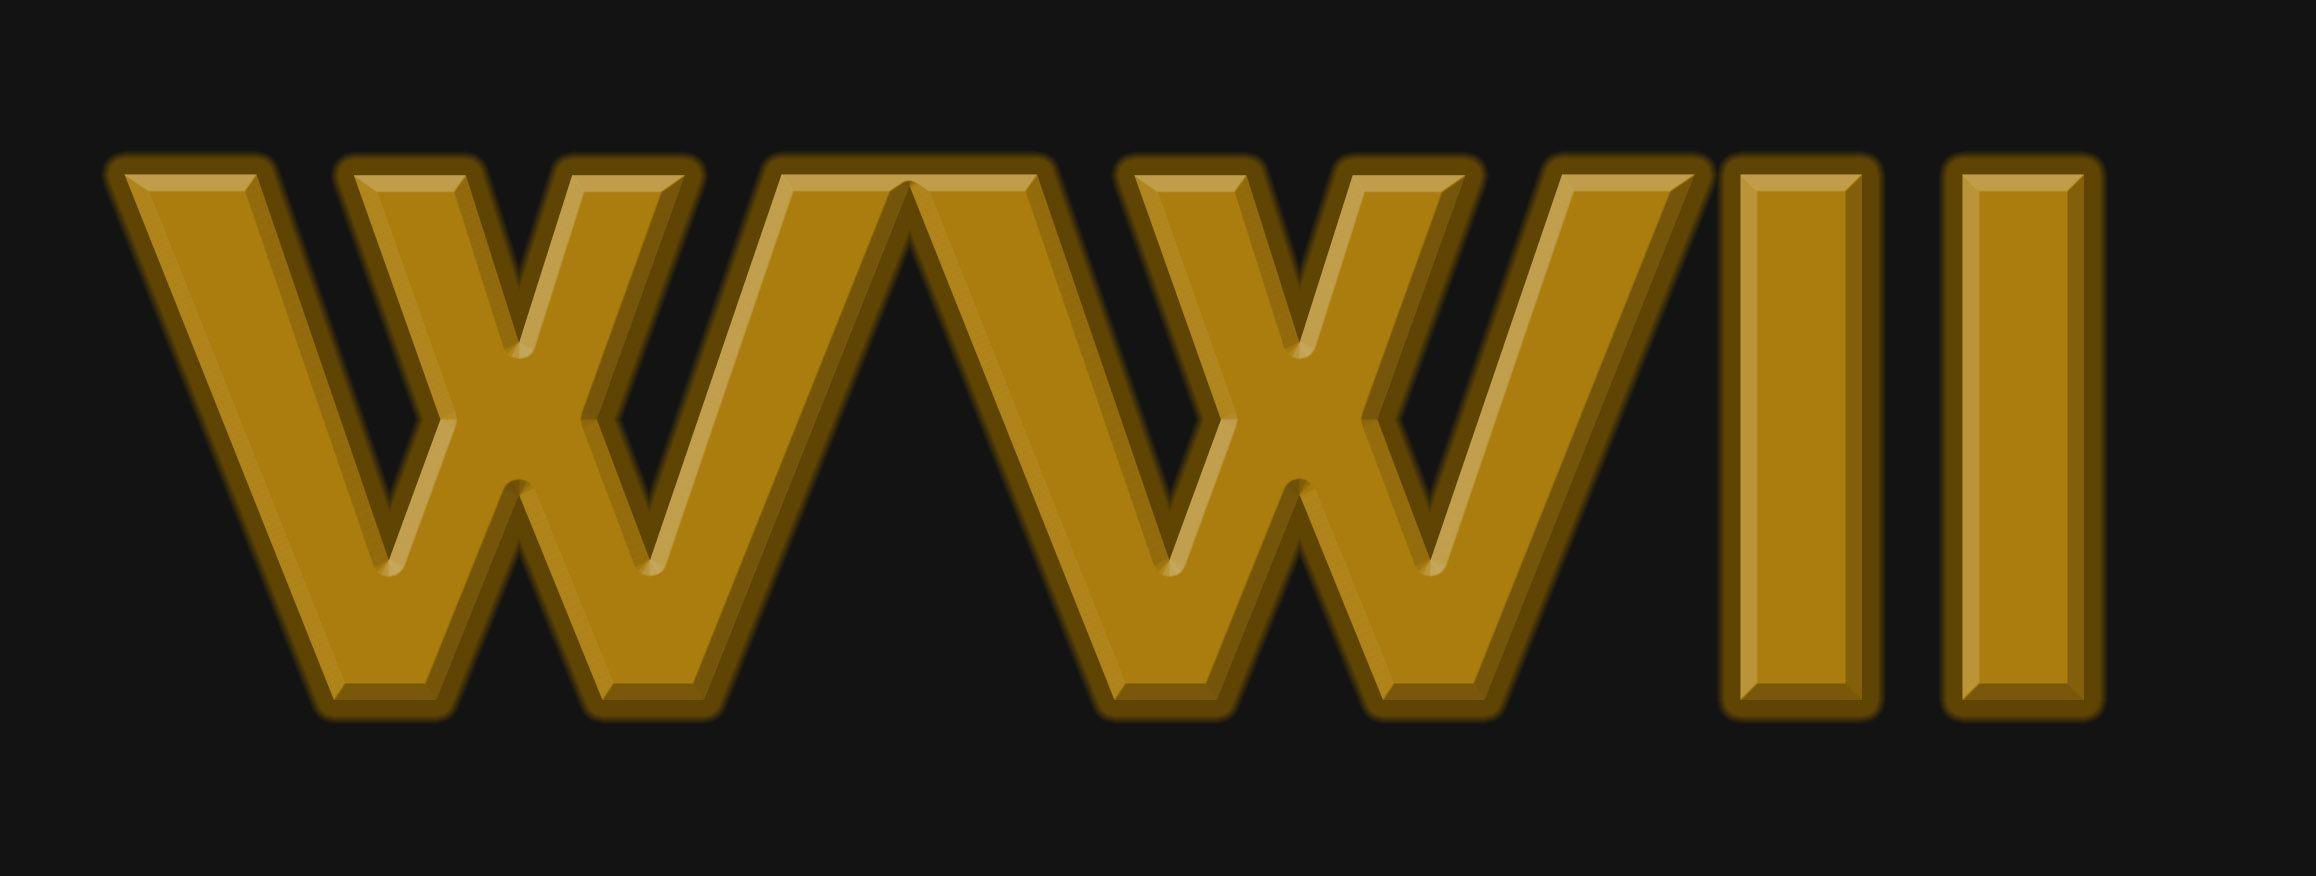 WWII Logo - Set Wonder Woman Sequel During World War II and use This Logo